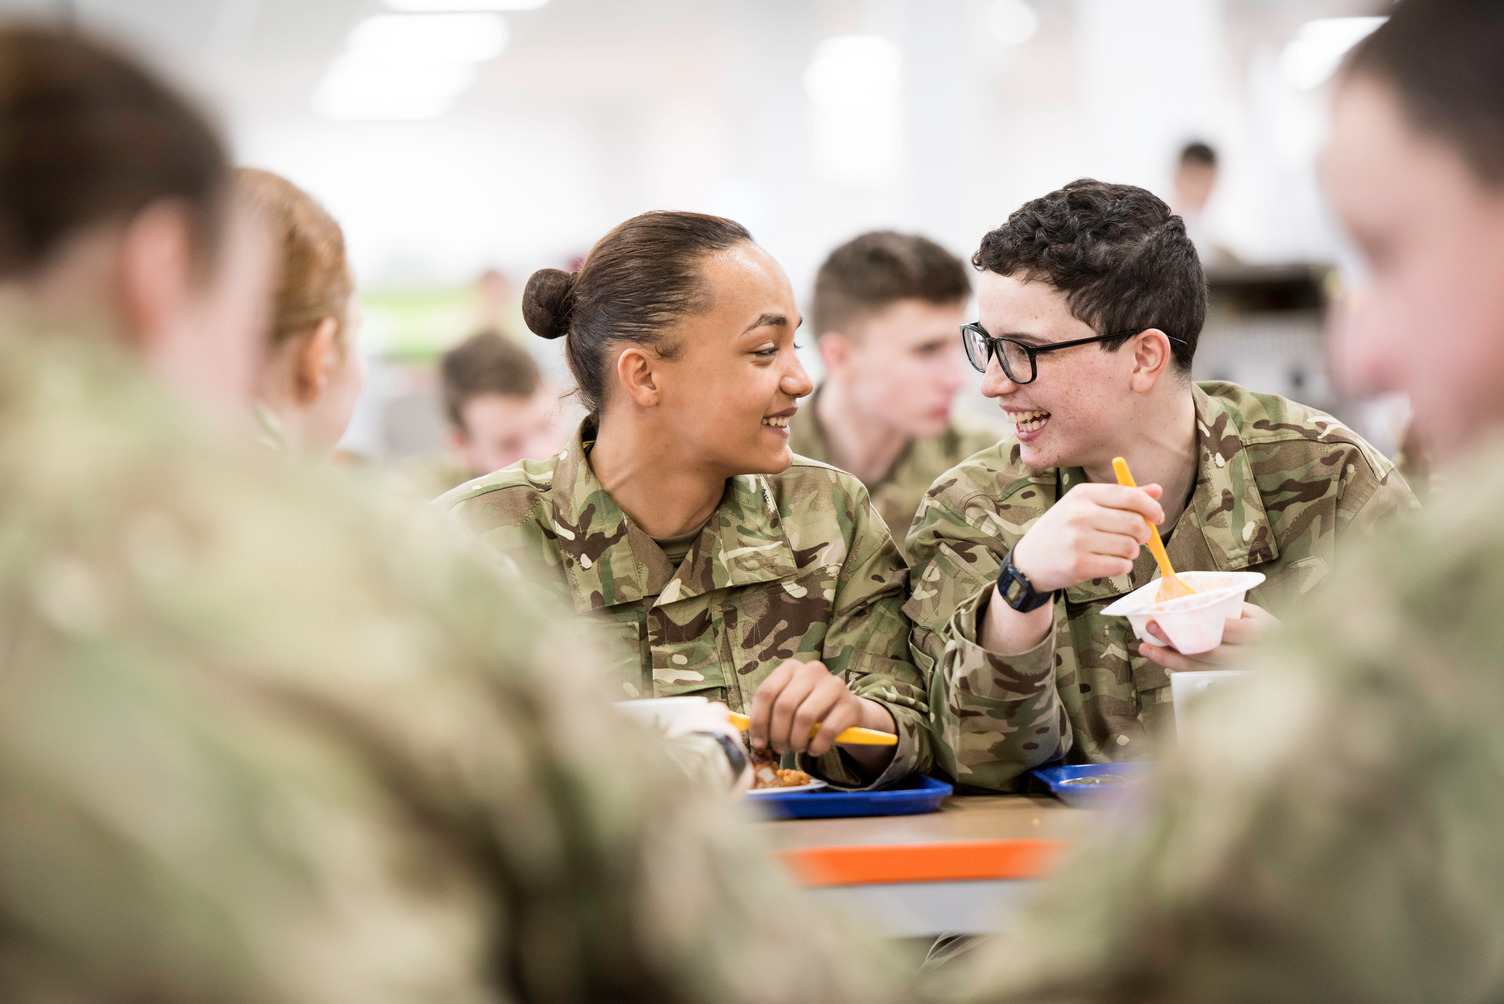 APPRENTICESHIPS WITH THE BRITISH ARMY